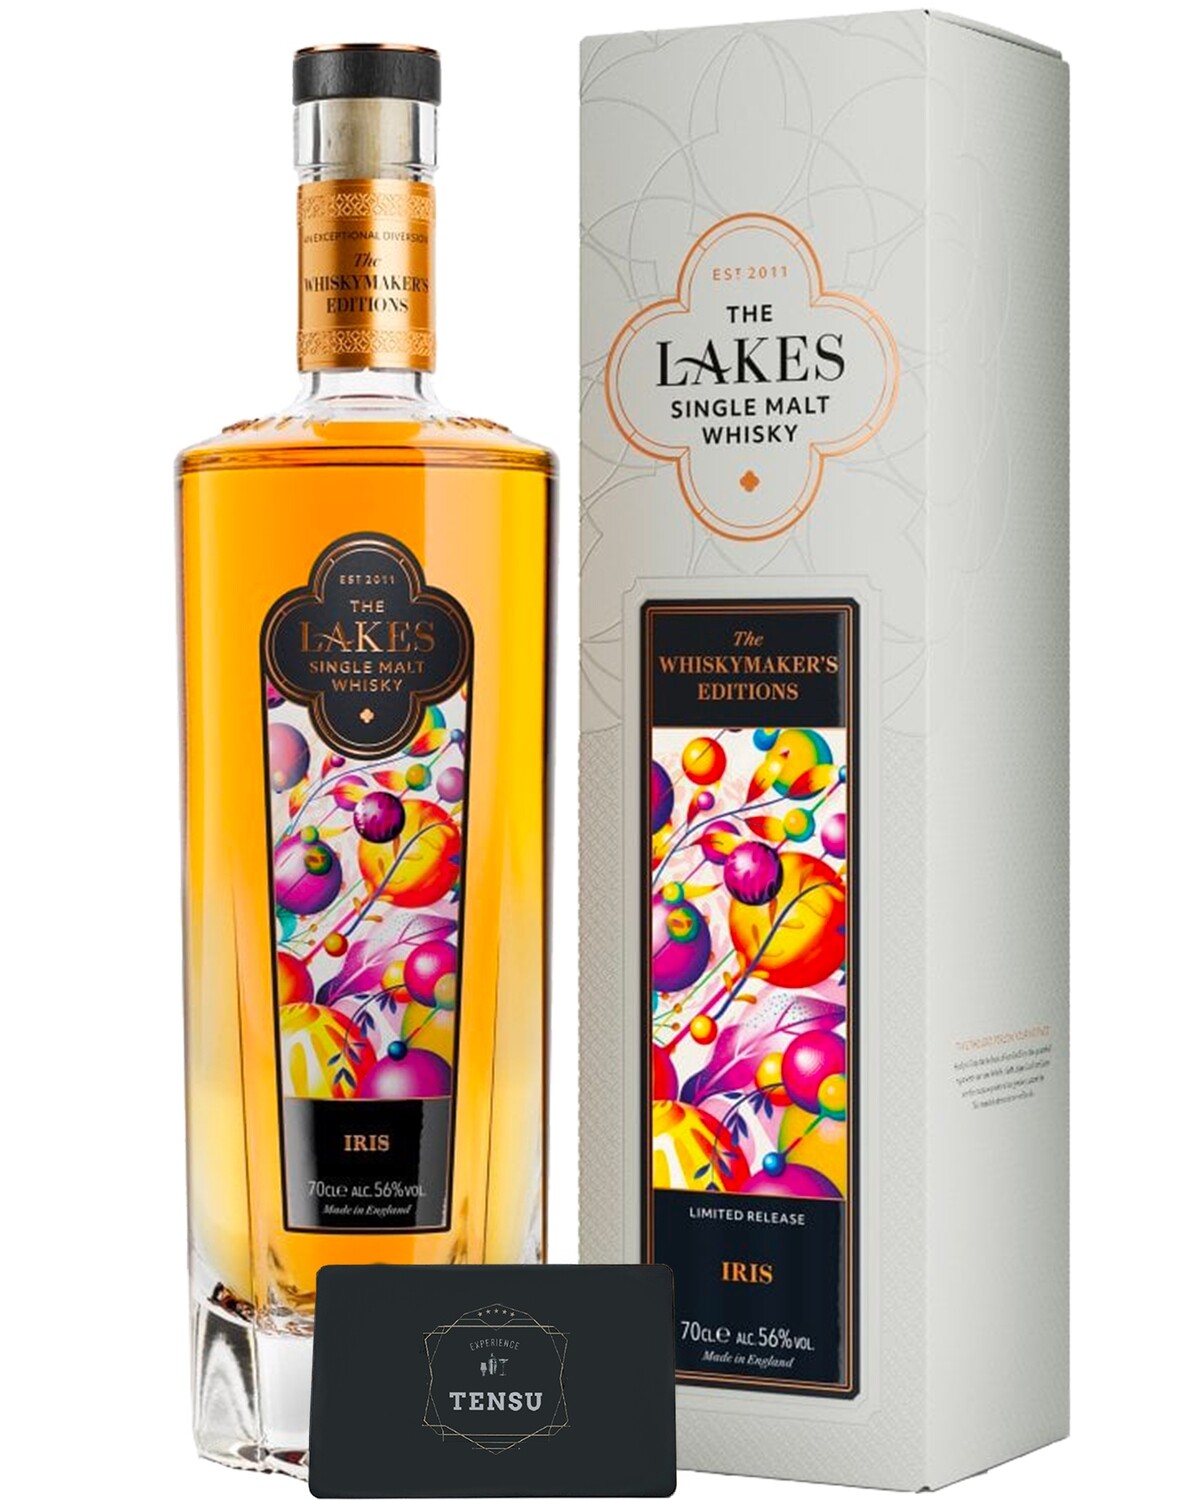 The Lakes - The Whiskymaker's Editions - Iris 56.0 "The Lakes Distillery"